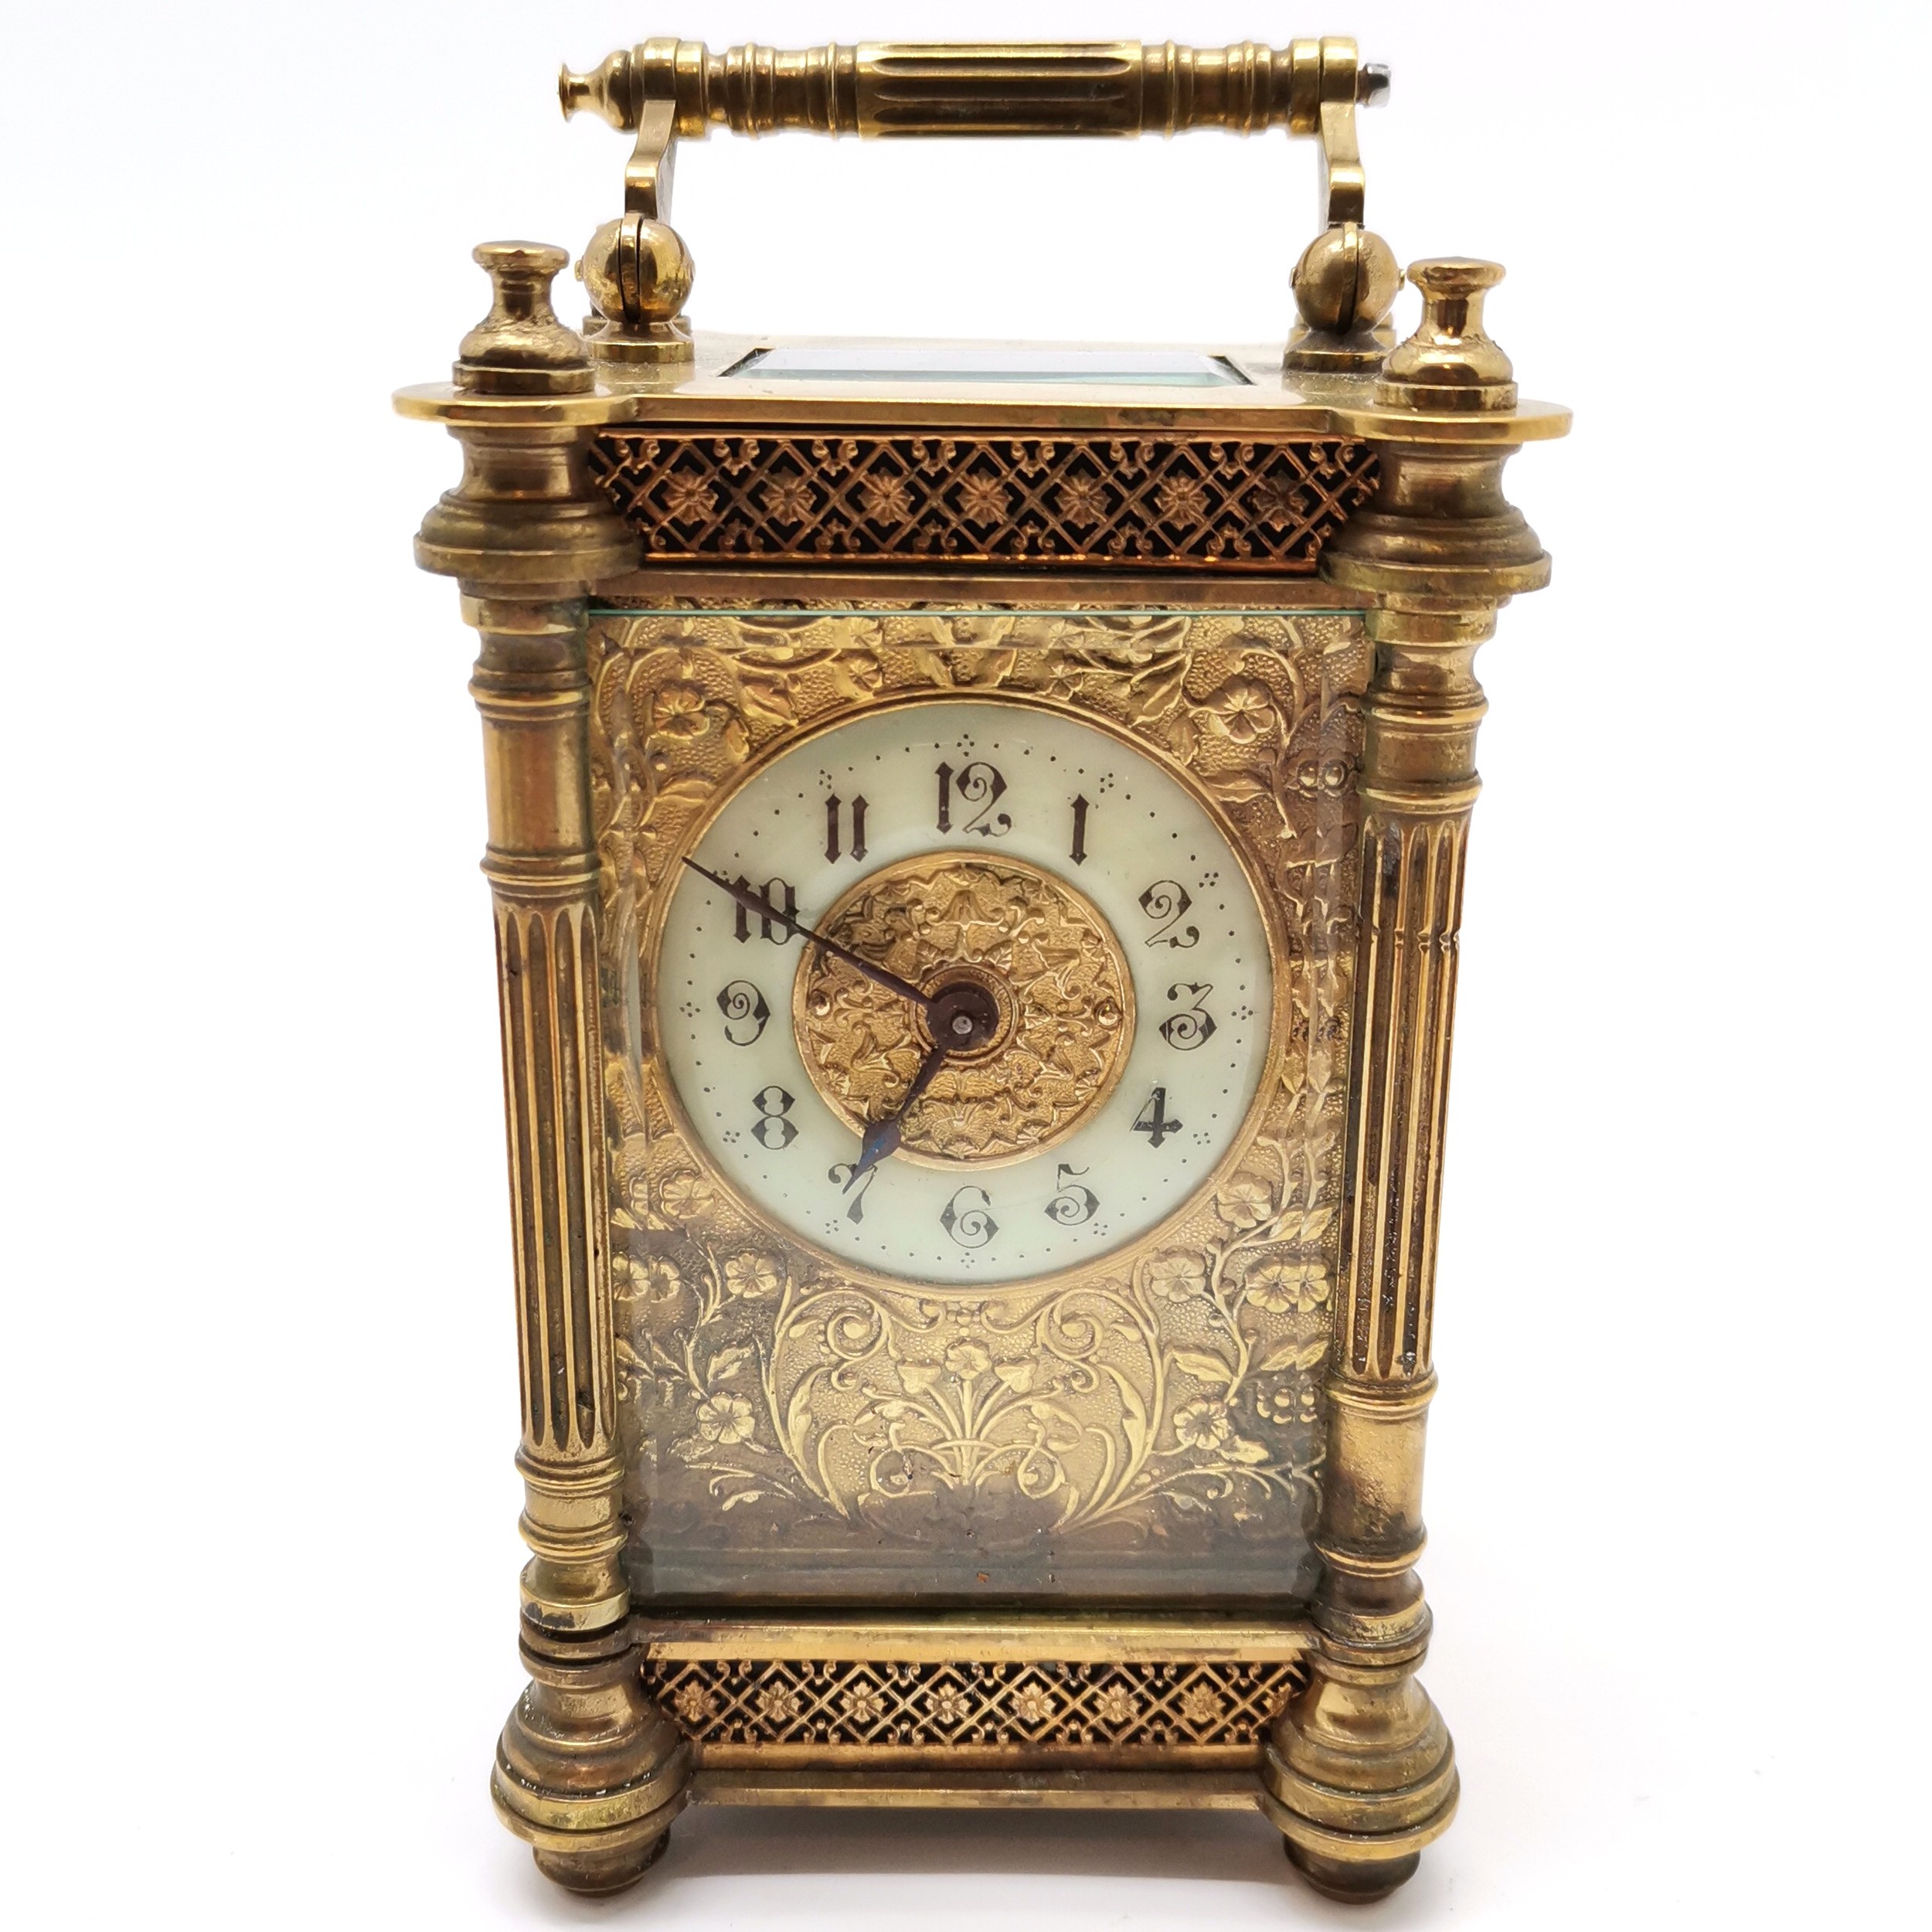 Antique brass cased carriage clock with fluted column detail - 13cm high & running at time of